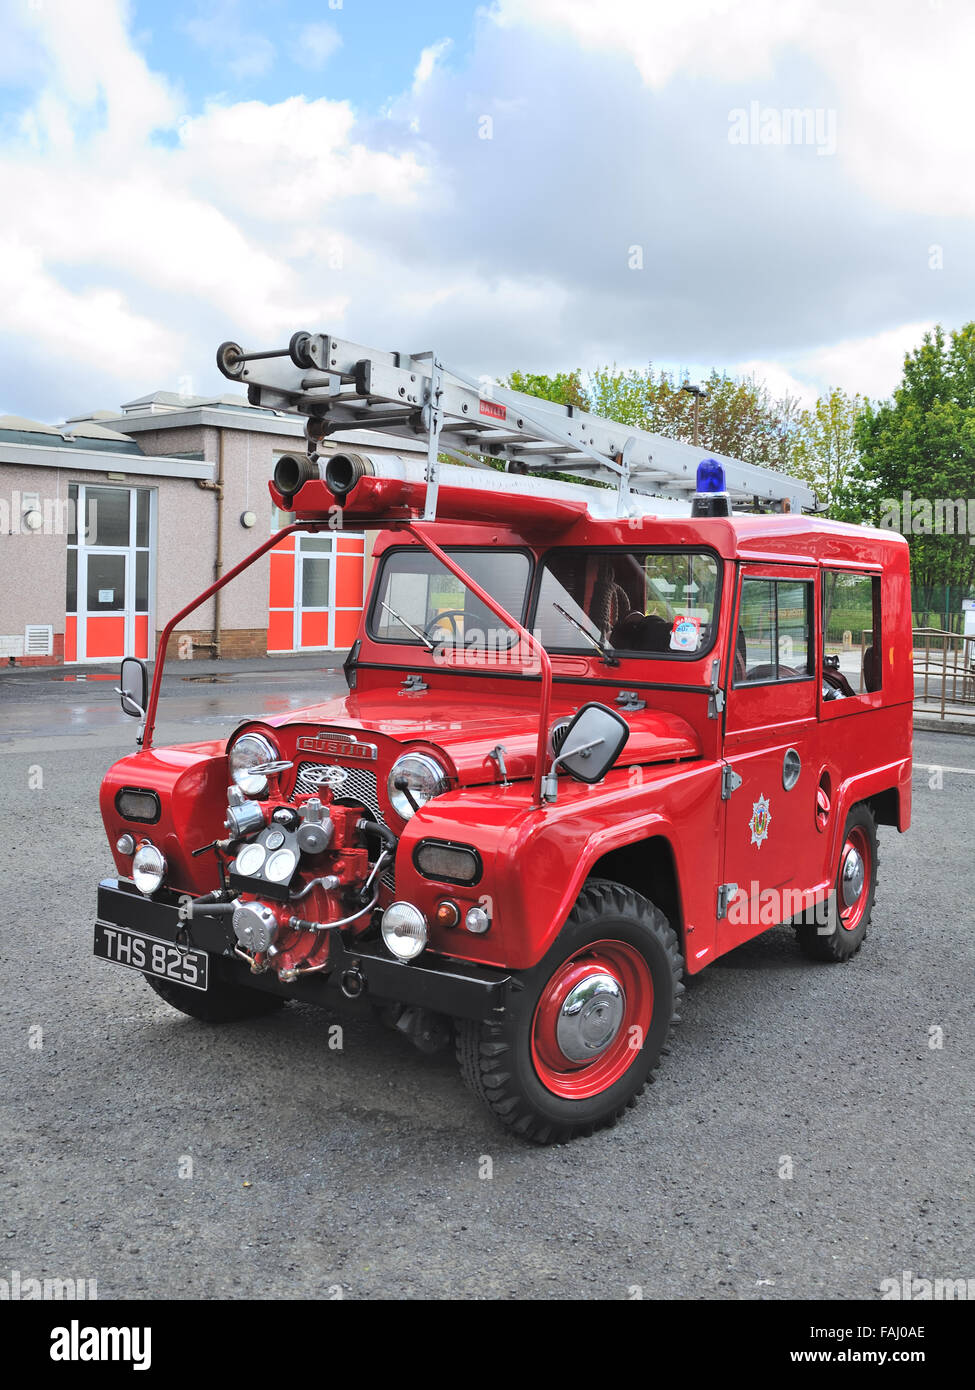 Vintage rural Austin Gypsy equipped for fire service use on the Isle of Arran, Scotland maintained by the Scottish Fire Service Heritage Trust. Stock Photo